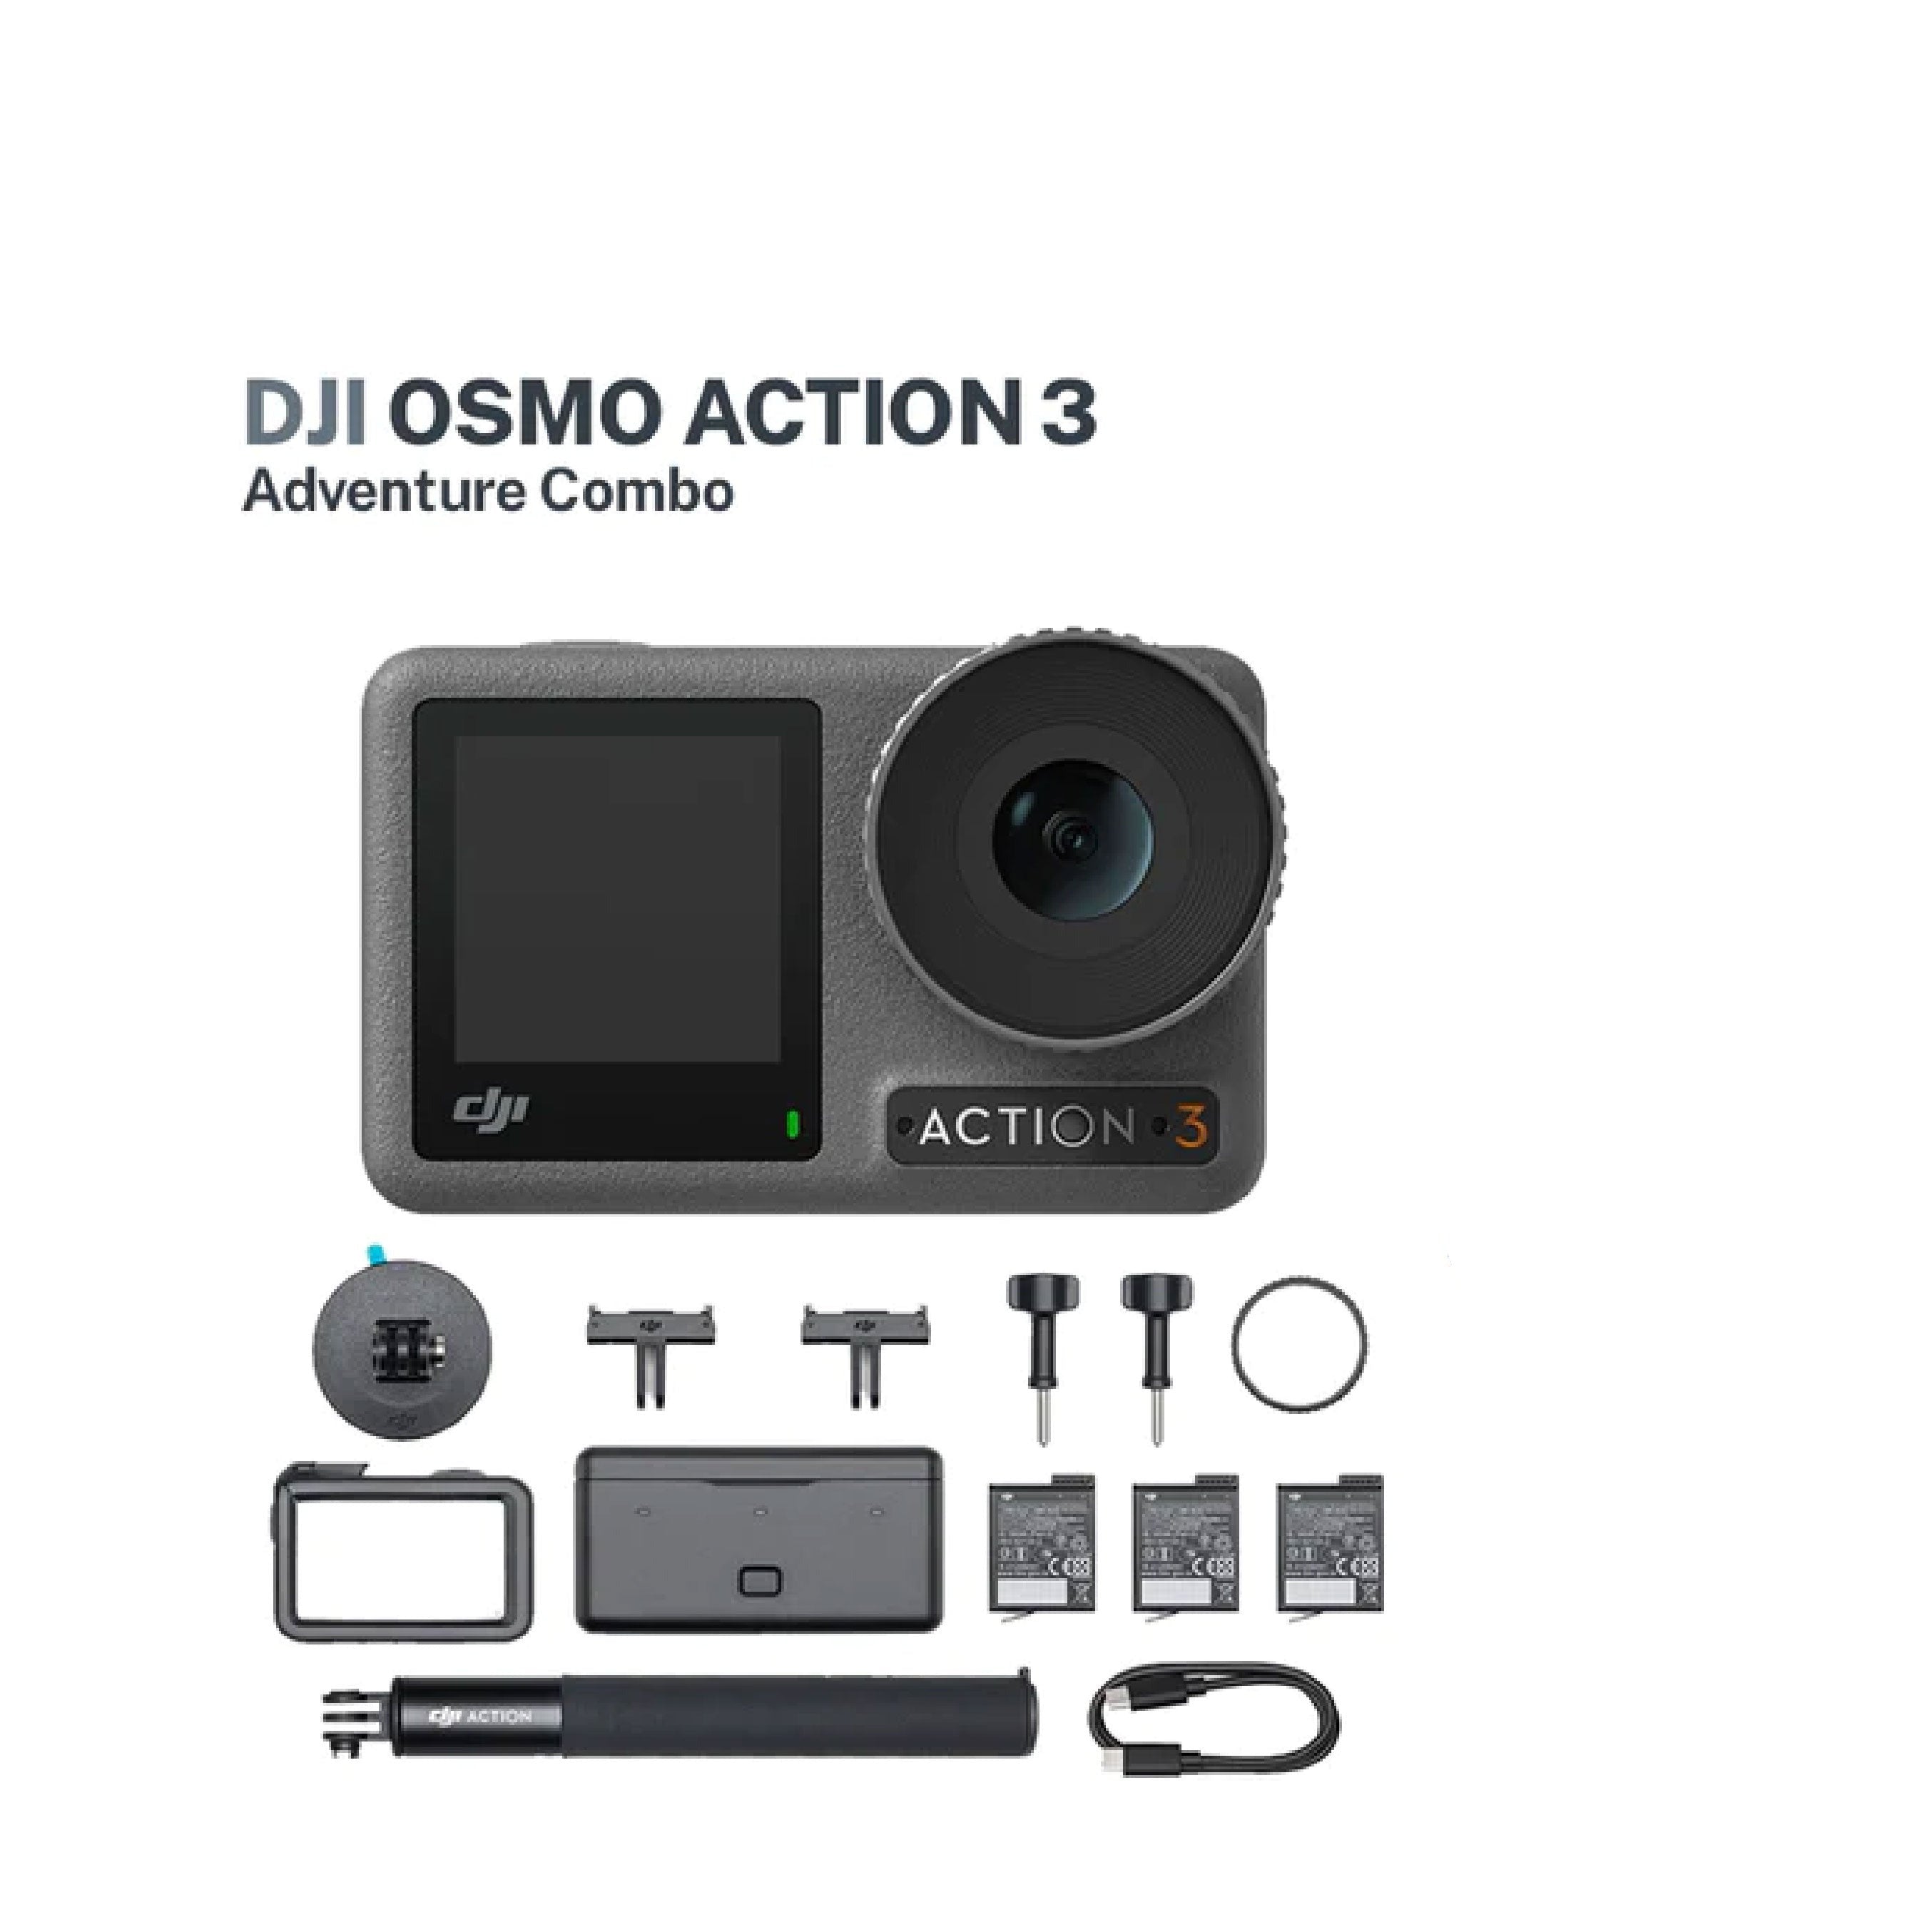 DJI Osmo Action 3 Camera Adventure Combo with FREE 64GB SanDisk